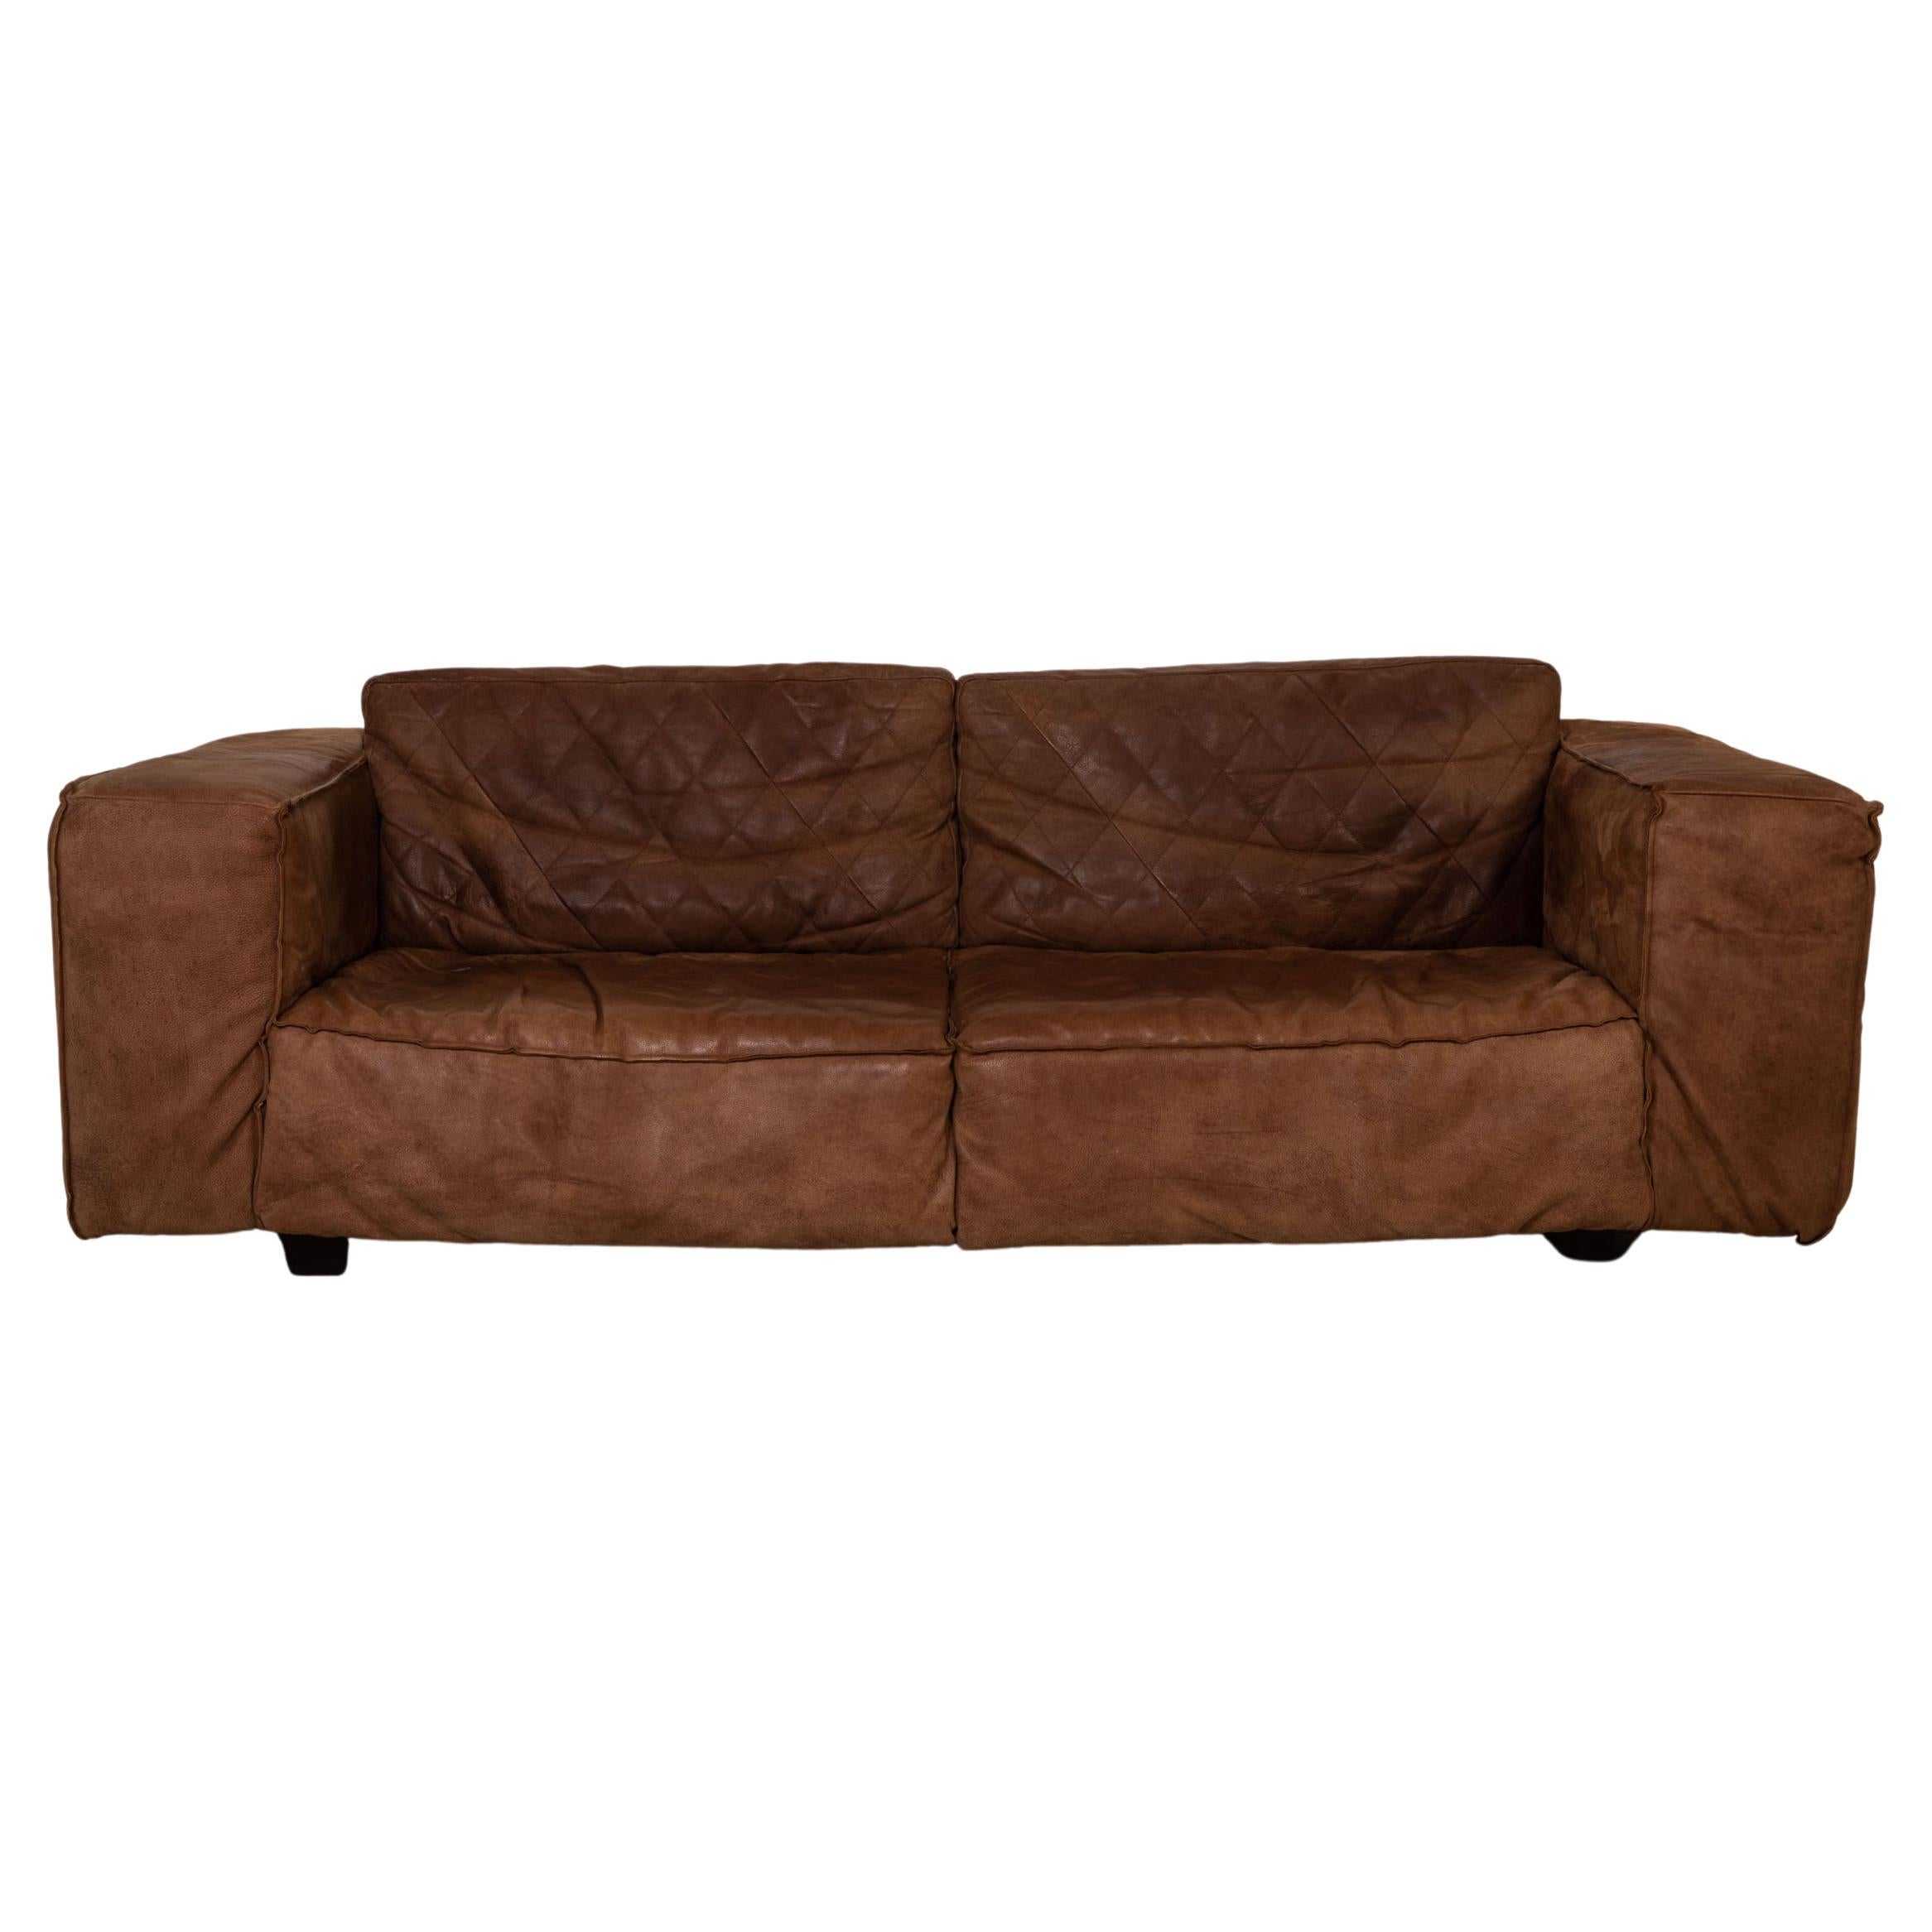 Tommy M by Machalke Leather Sofa Brown Four-Seater Couch For Sale